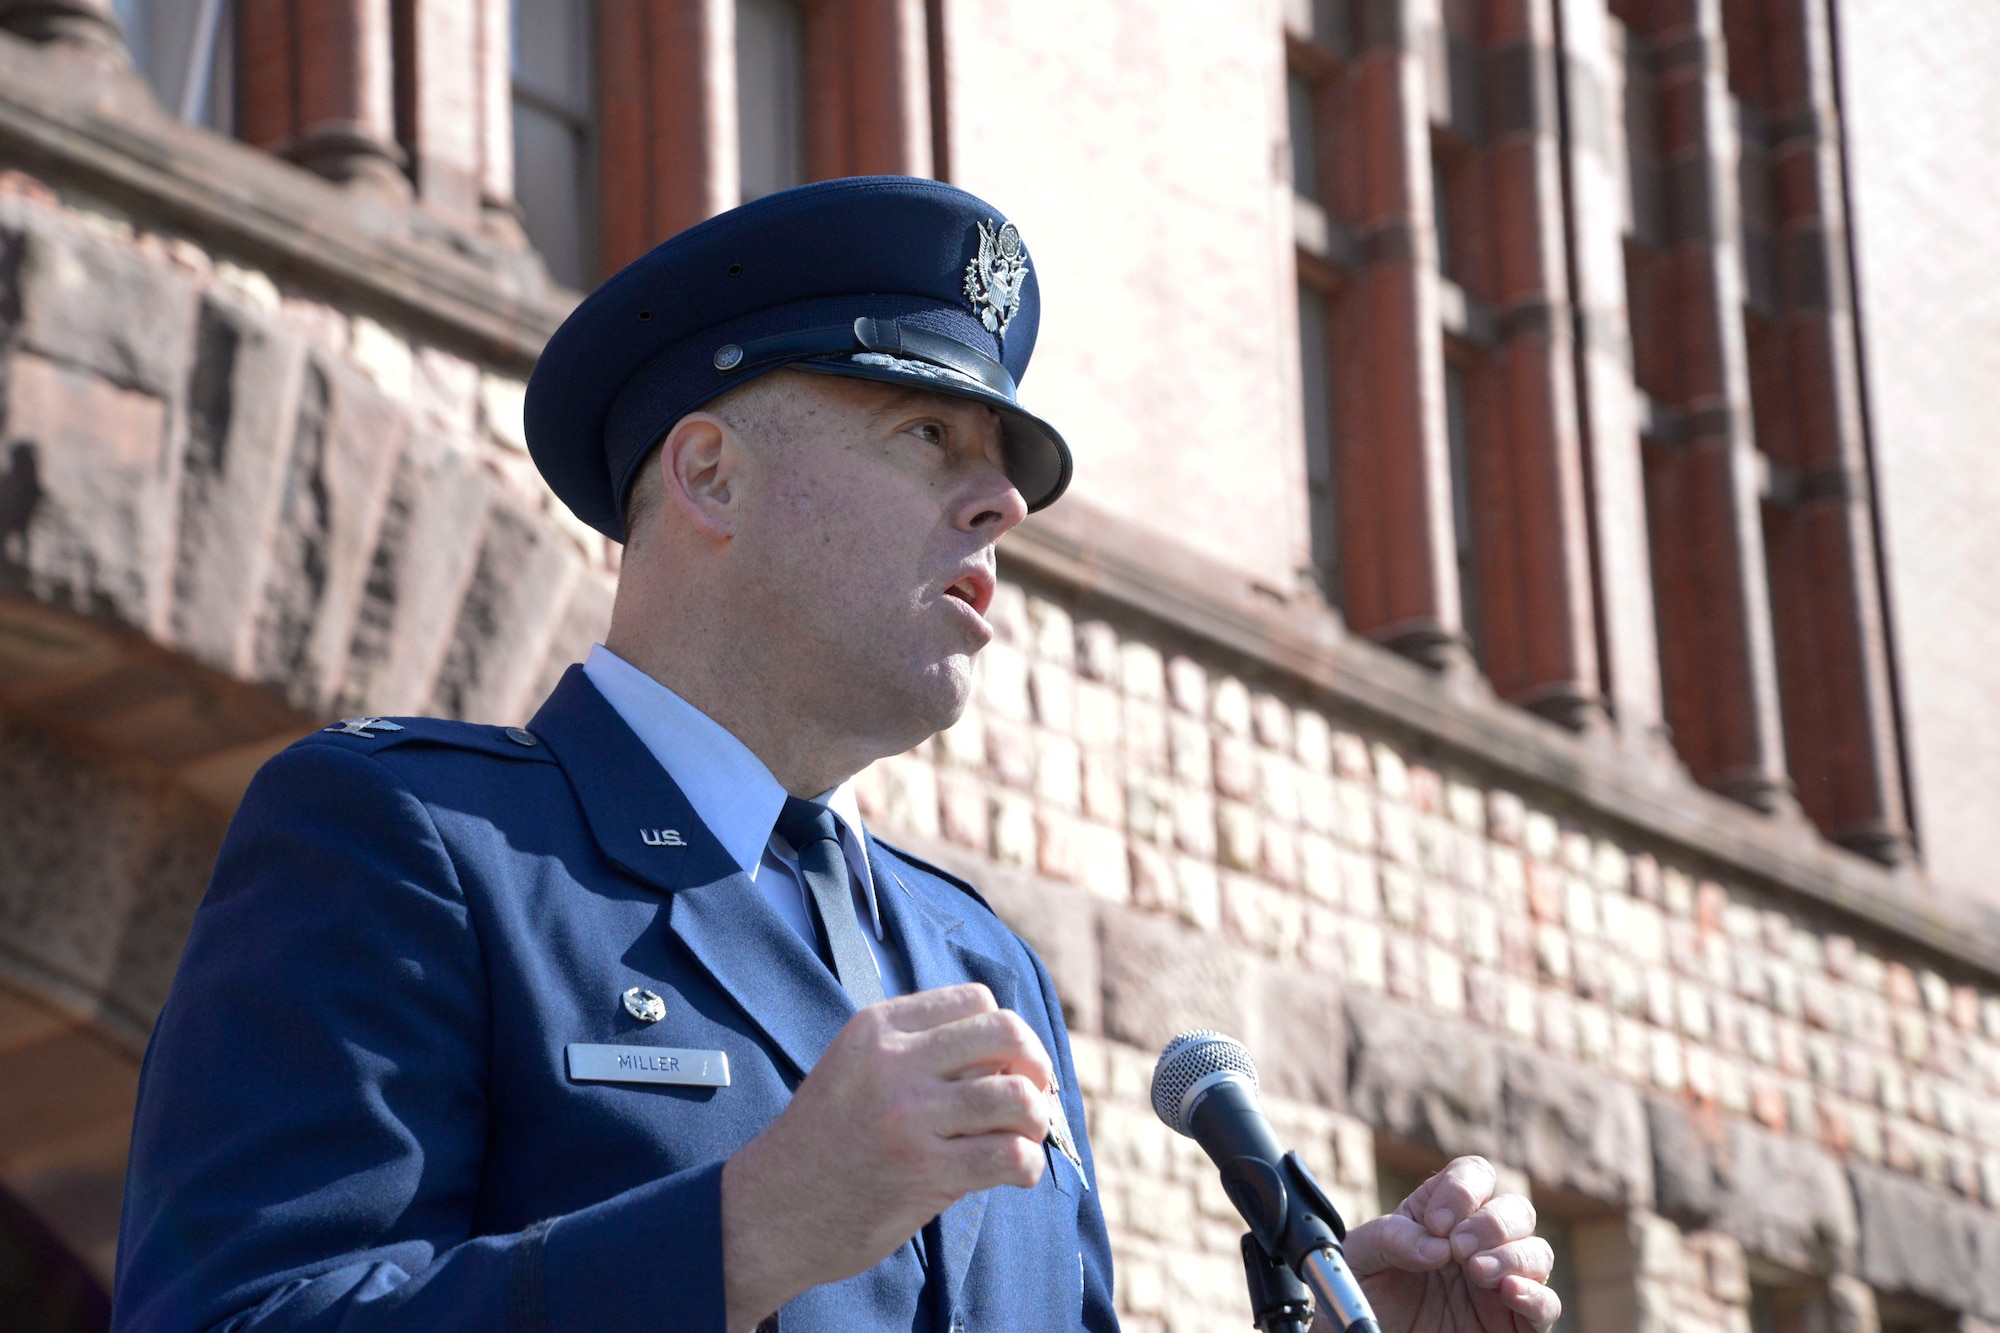 Col. Patrick Miller, 88th Air Base Wing and Wright-Patterson Air Force Base commander, informs cadets of Detachment 645 of the commitment that awaits them serving their country April 14, 2022 at Ohio State University. The Tri-Service Parade has been a tradition at Ohio State University since 1916, and allows several cadets and midshipmen to receive scholarship awards from generous donors. (U.S. Air Force photo by Darrius Parker)